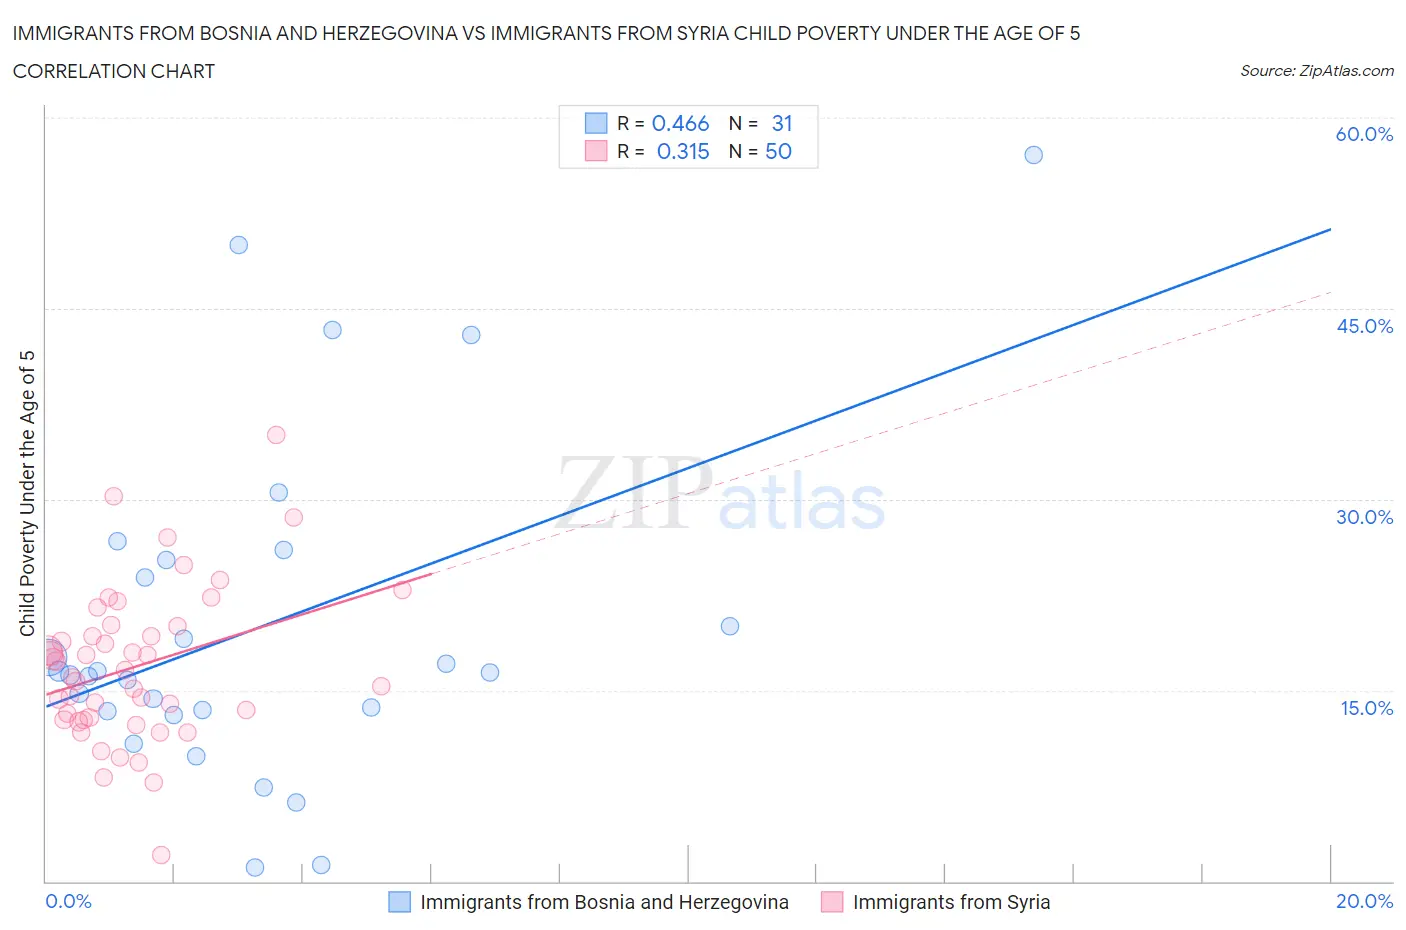 Immigrants from Bosnia and Herzegovina vs Immigrants from Syria Child Poverty Under the Age of 5